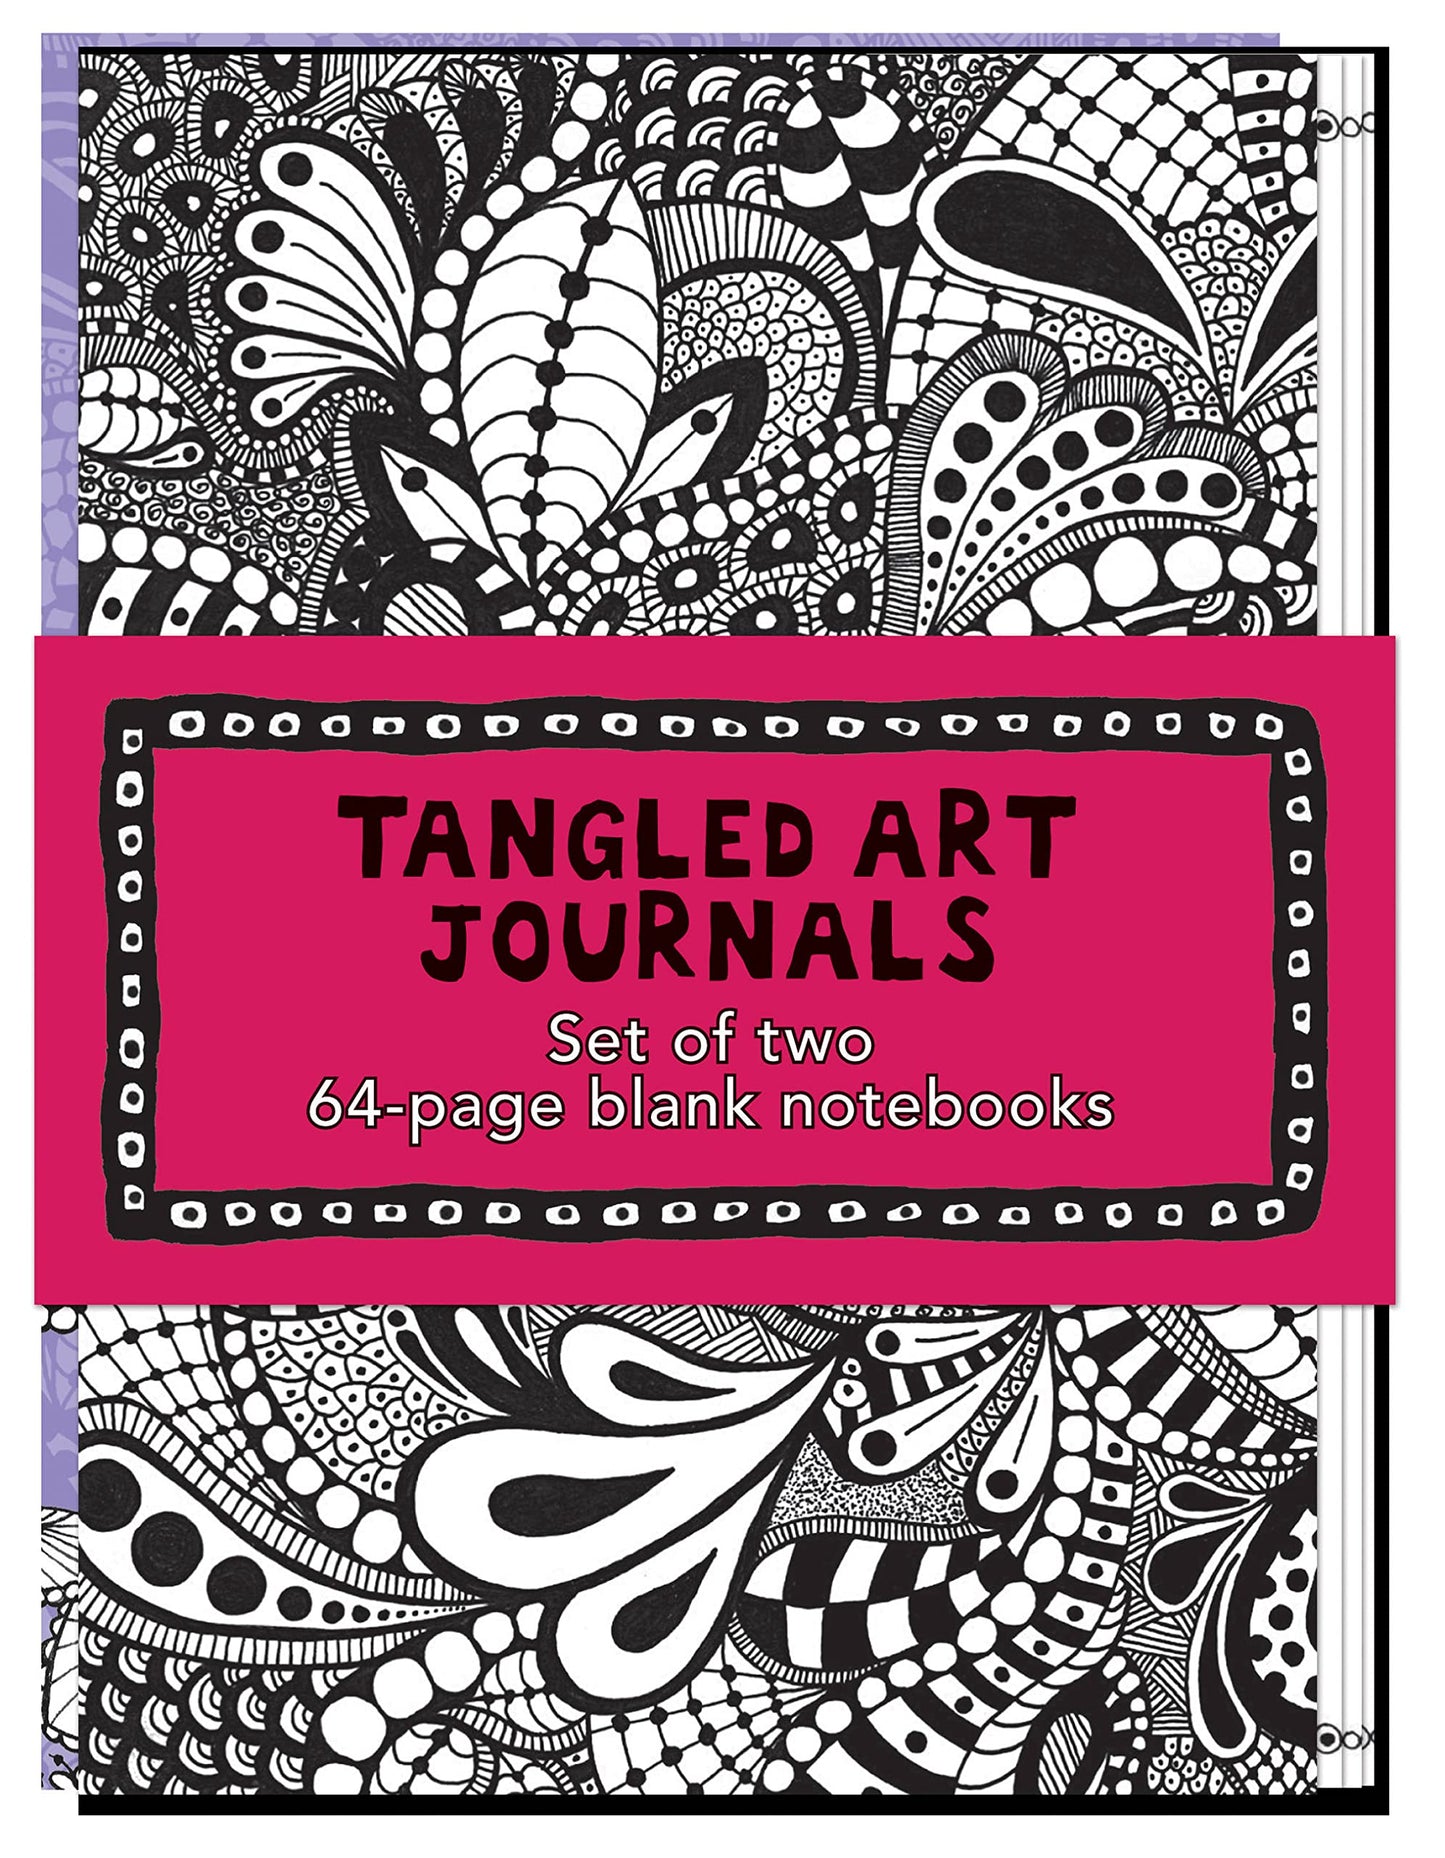 Tangled Art Journals: Set of two 64-page blank notebooks